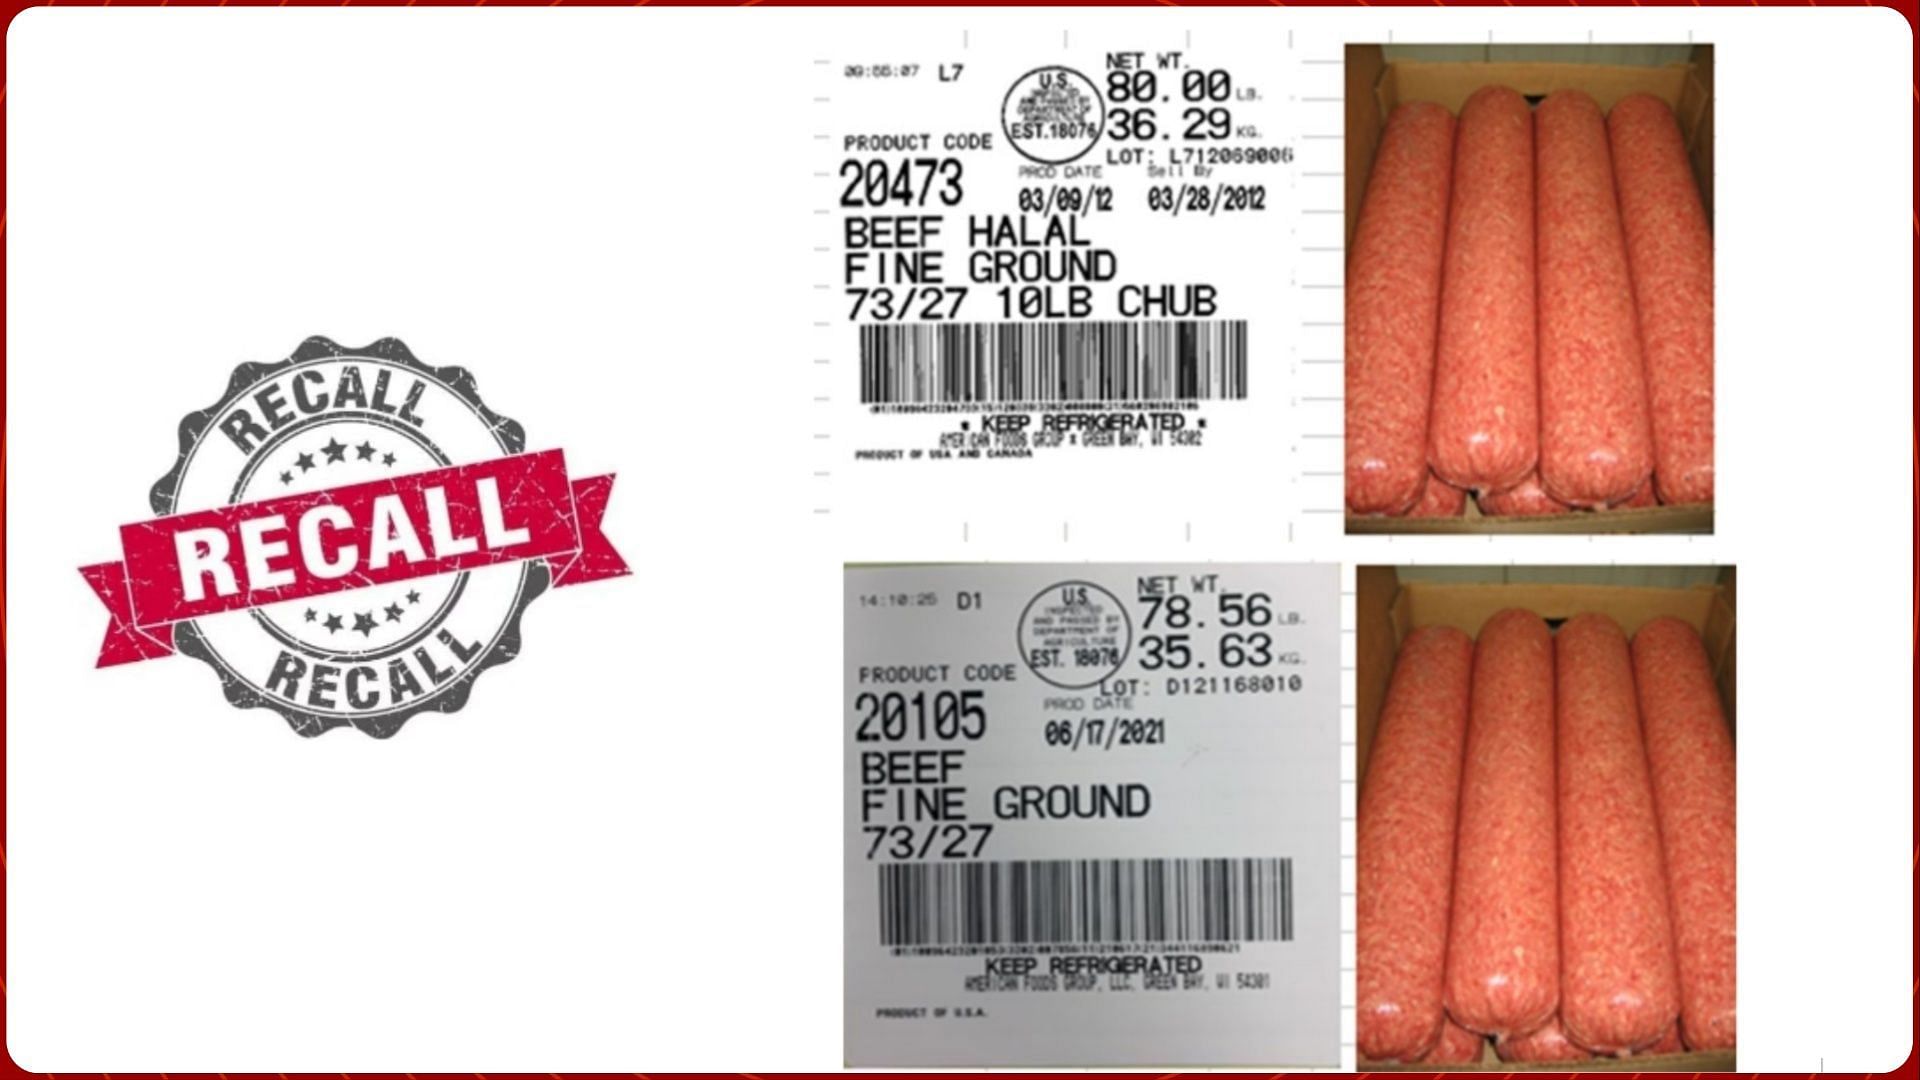 American Foods Group, LLC recalled its Ground Beef products over STEC contamination concerns (Image via FSIS)